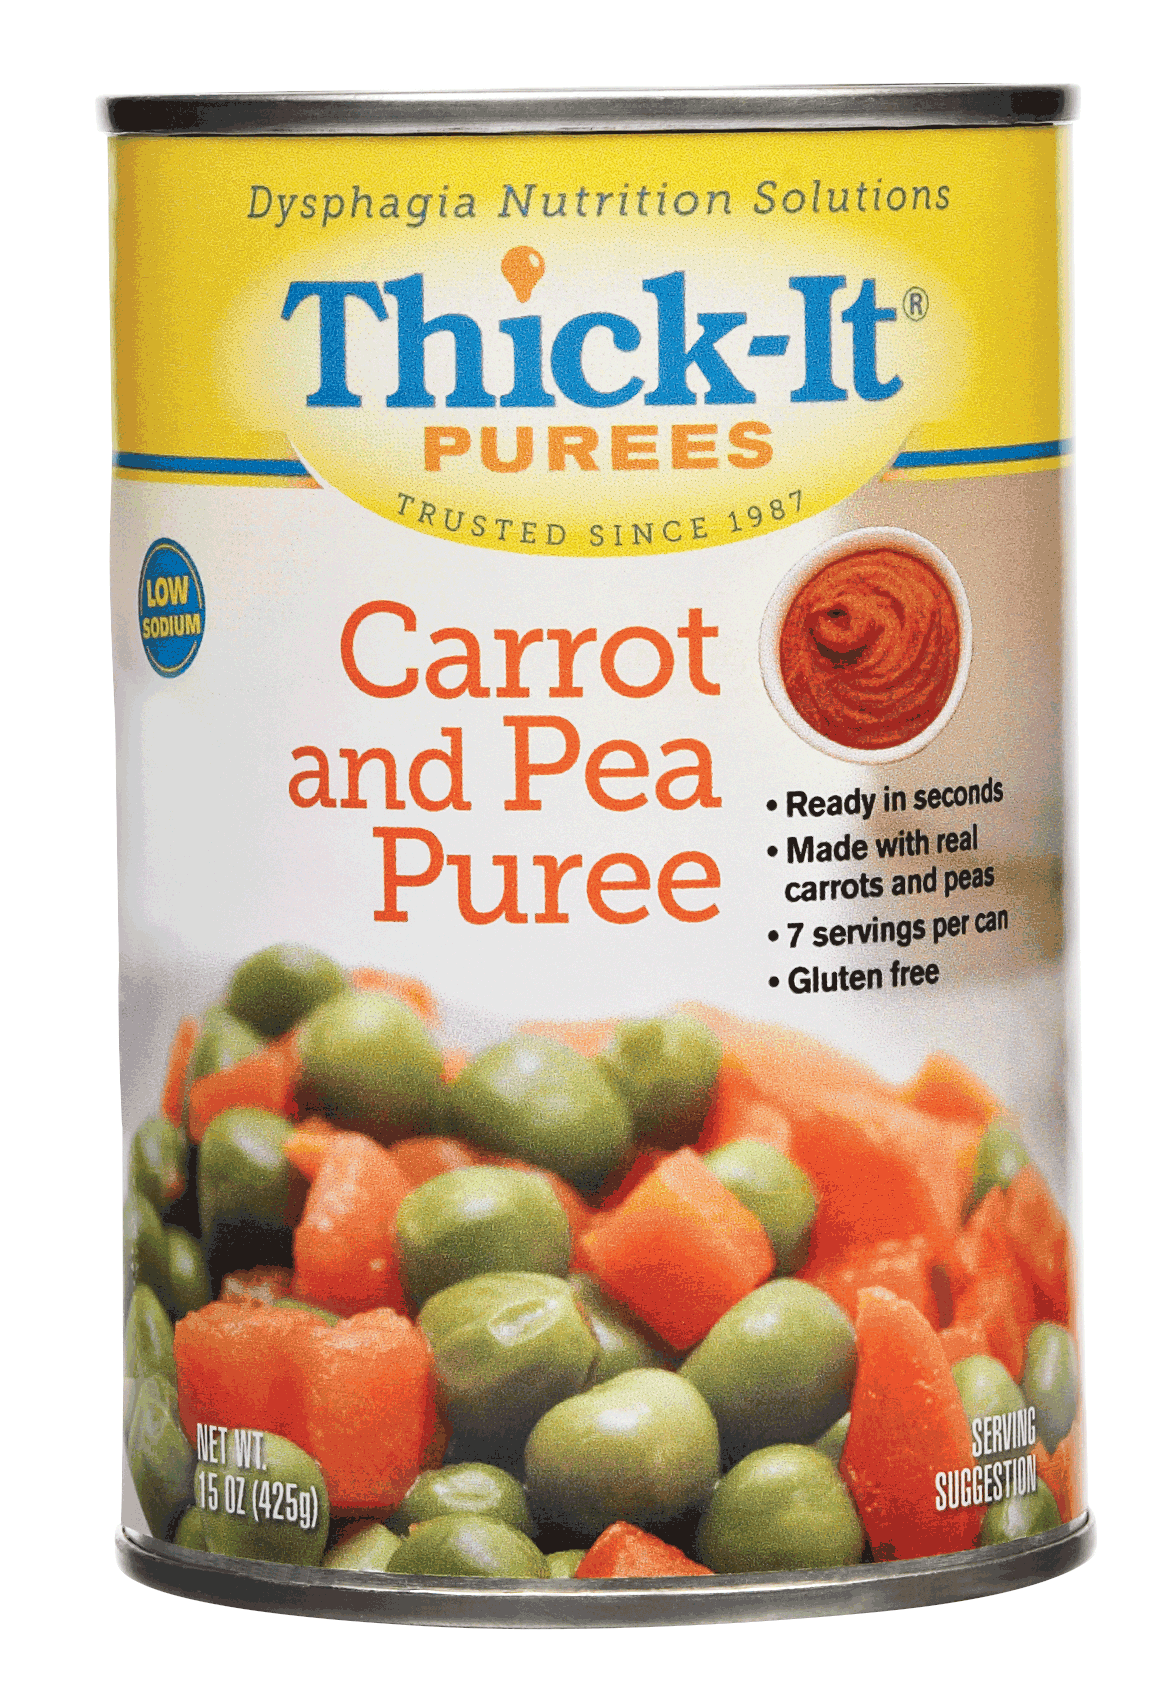 EA/1 - Thick-It Carrot and Pea Puree 15 oz. Can - Best Buy Medical Supplies